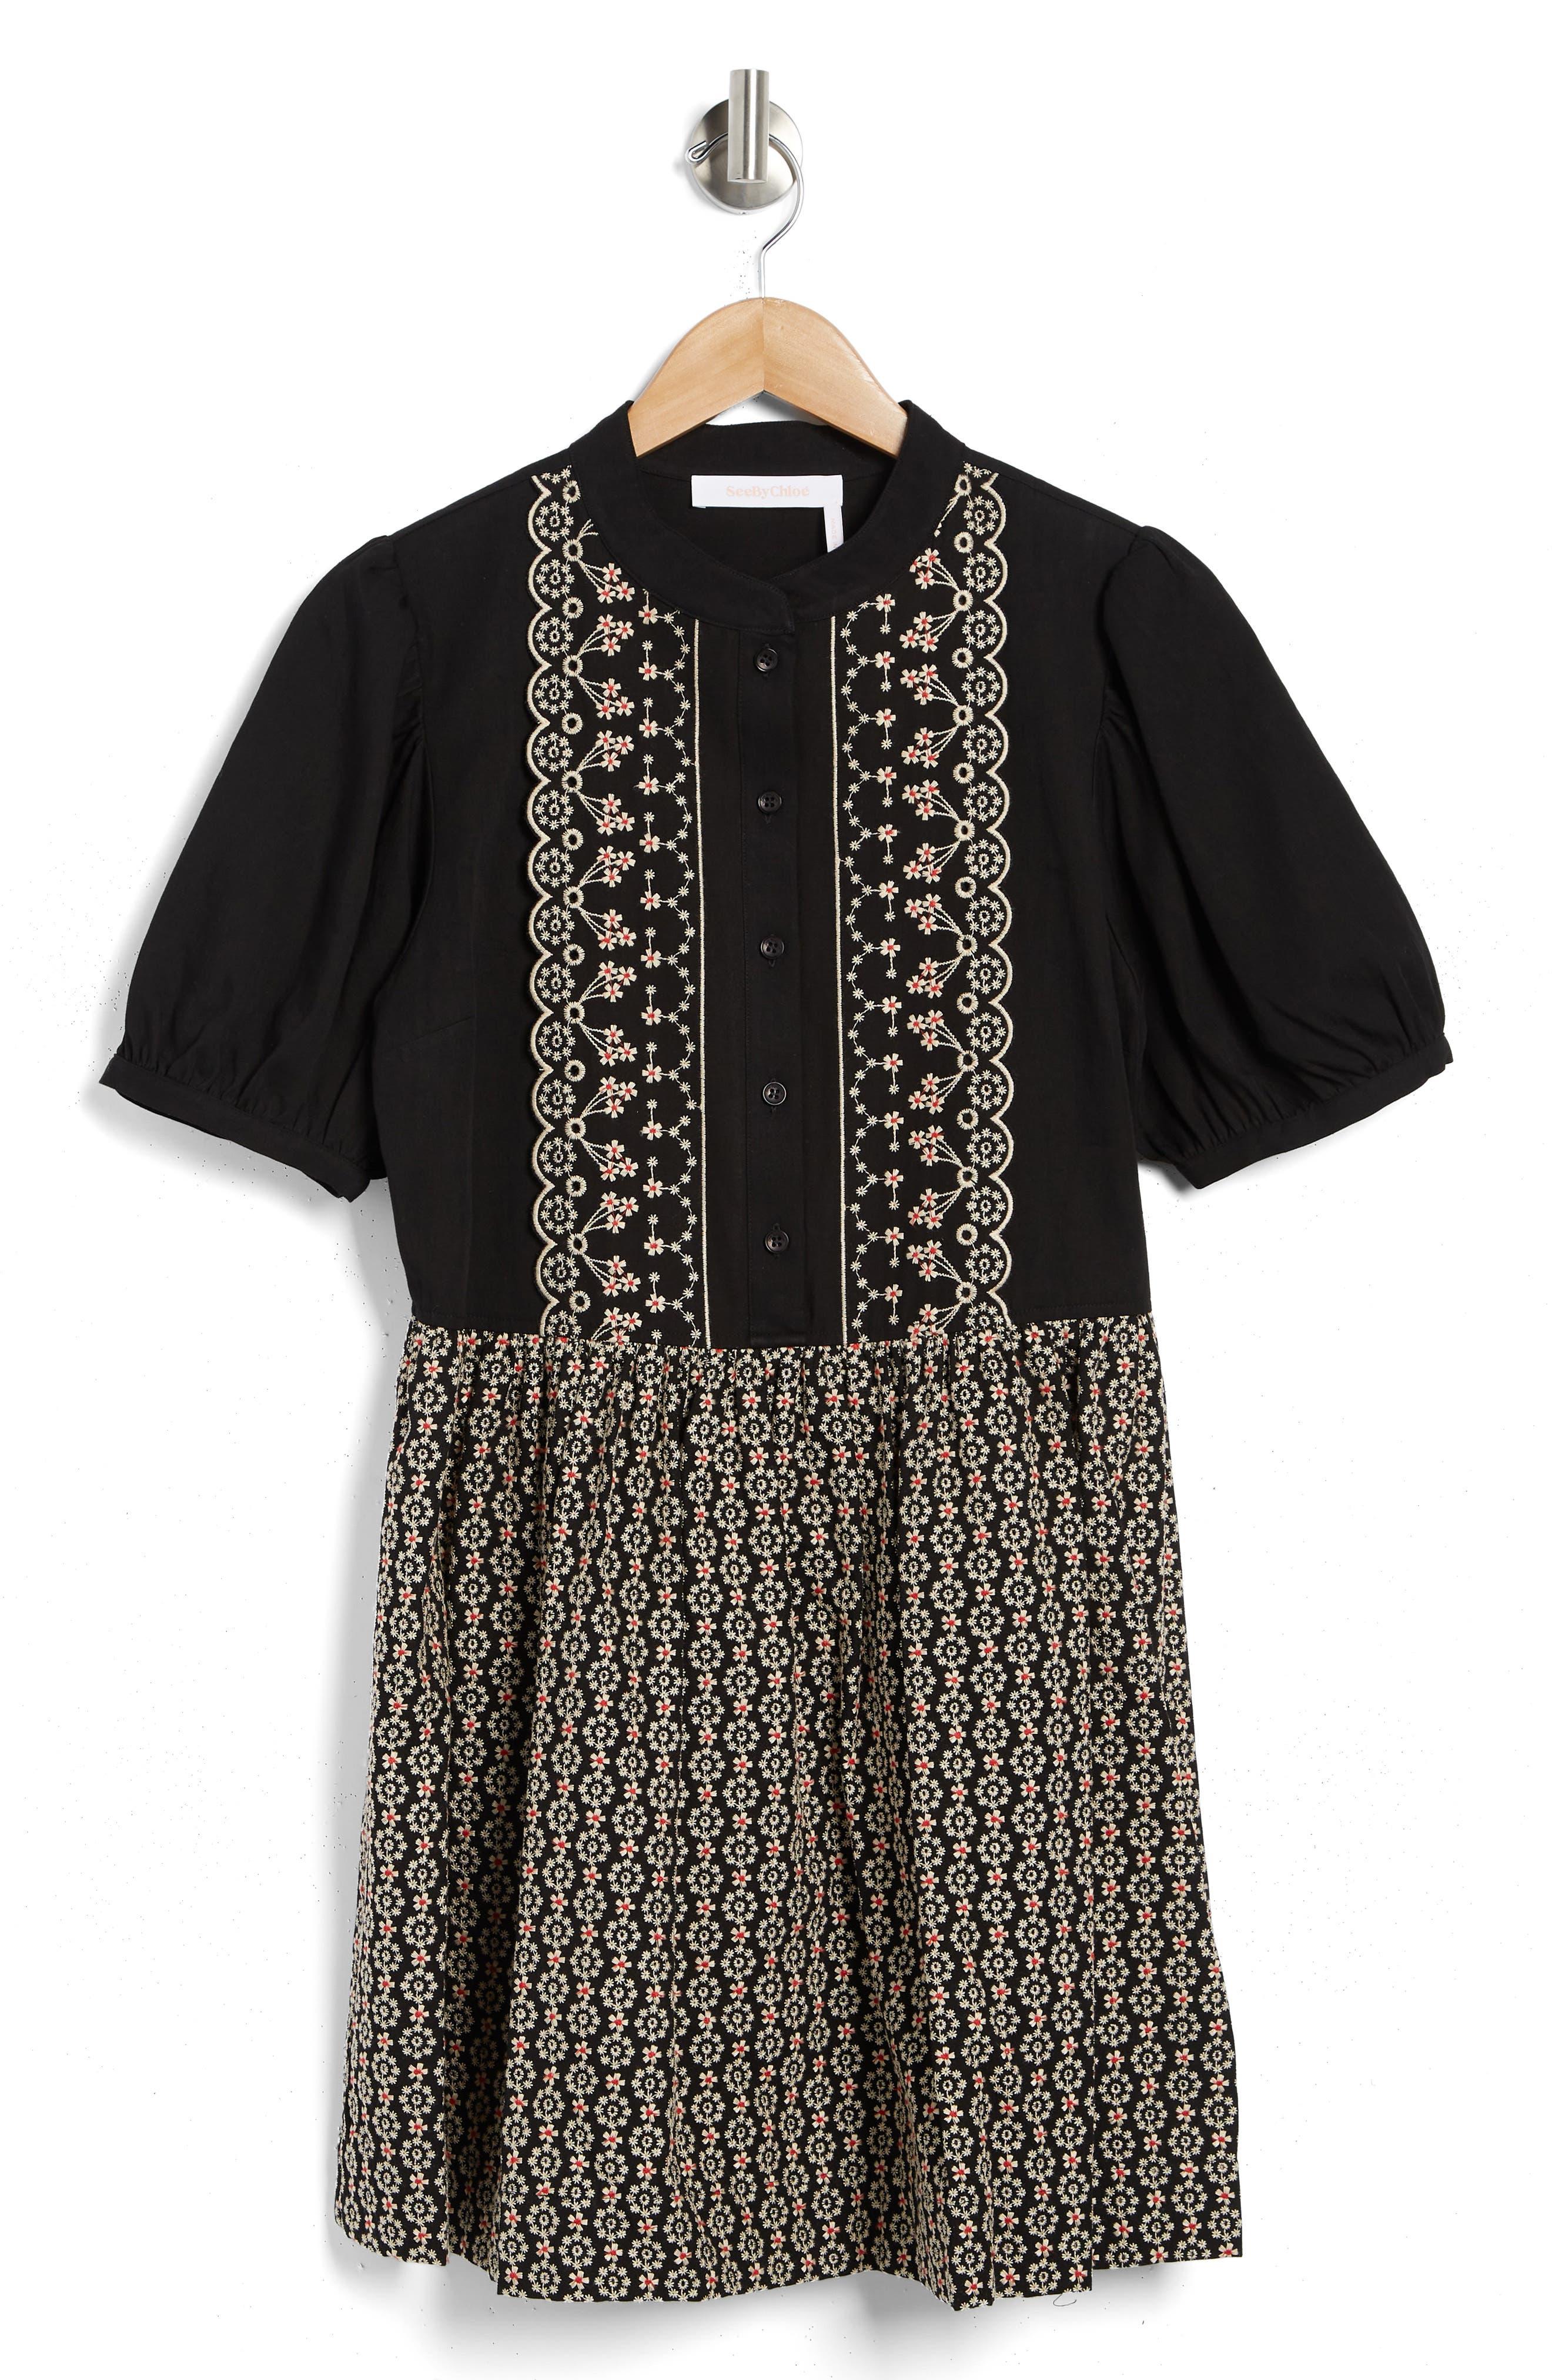 Chloé Eyelet Embroidered Cotton Dress in Black | Lyst